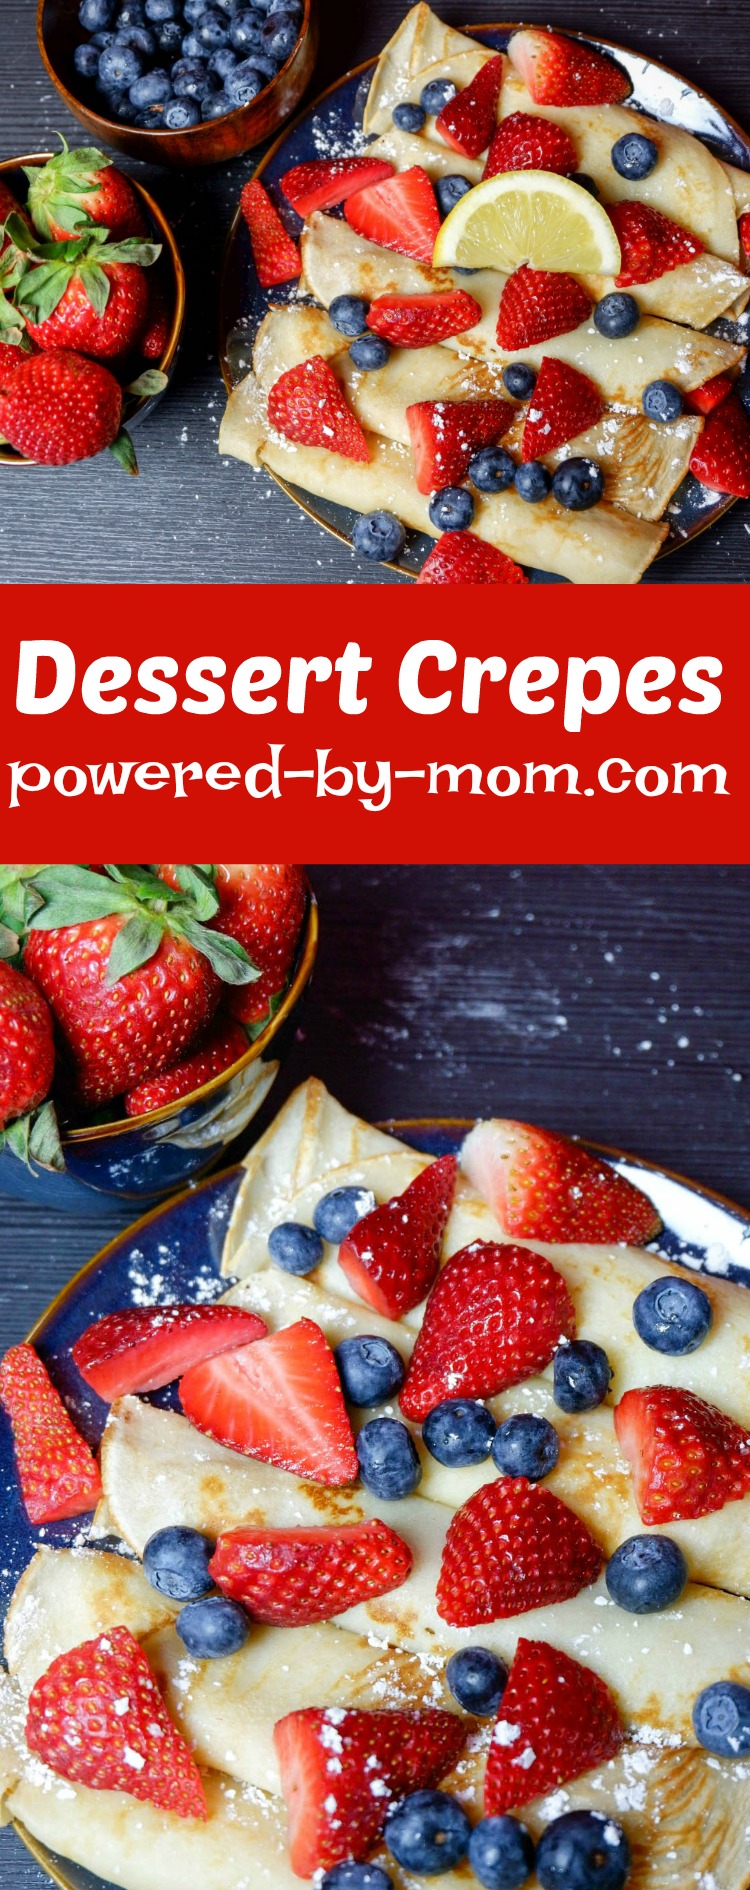 Crepes are delicious to serve for dessert, breakfast or special occasions. Even dinner for savory crepes! Perfect for special occasions like Canada Day!